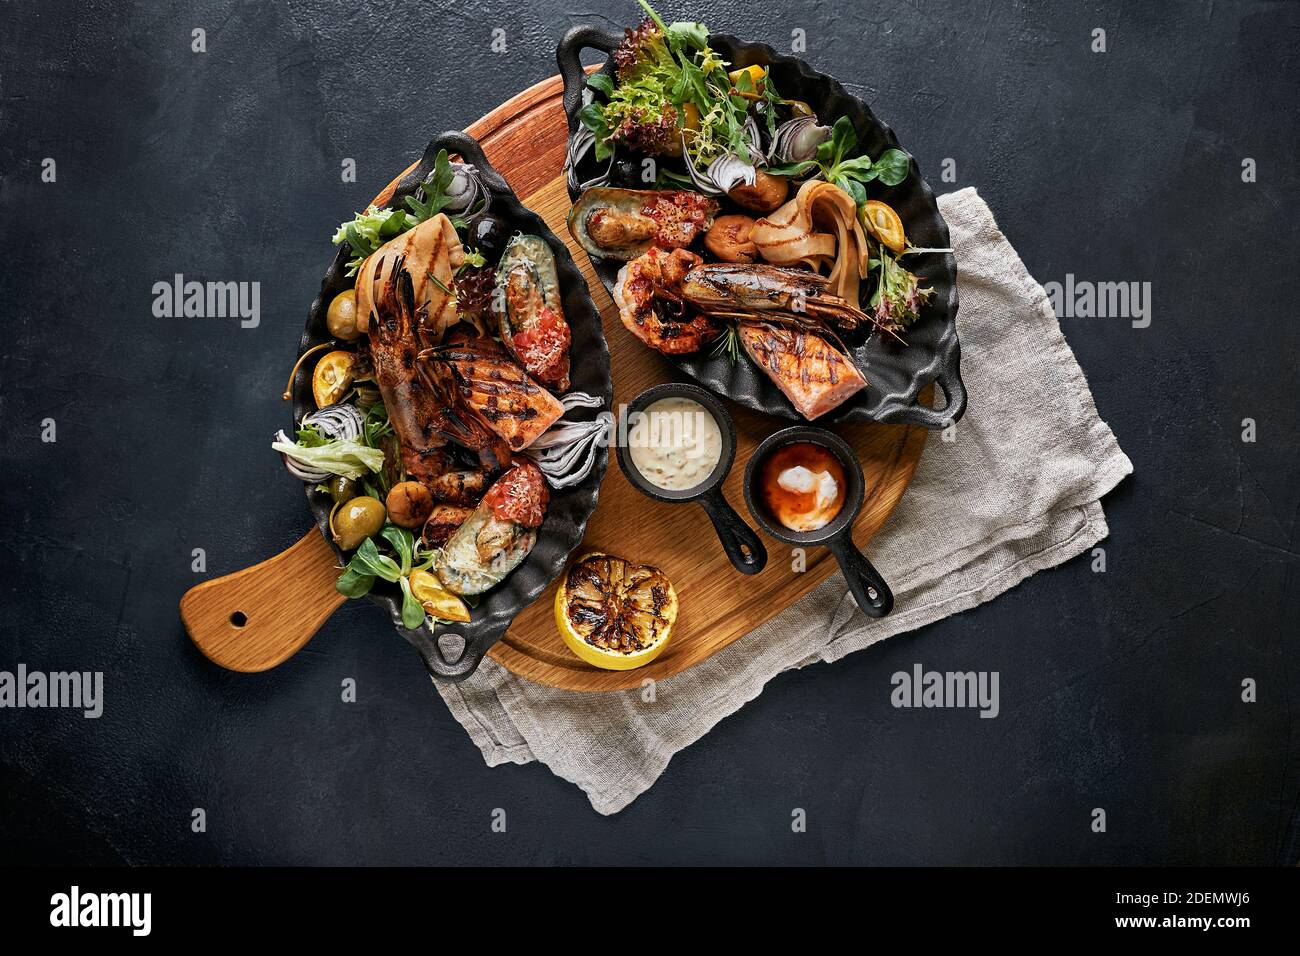 Mixed Roasted Seafood Platter Set, Contain Grilled Big Shrimps, Calamari  Squids and Barracuda Fish Garlic Pepper with Spicy Chili Sauce and Potatoes  Stock Photo - Alamy